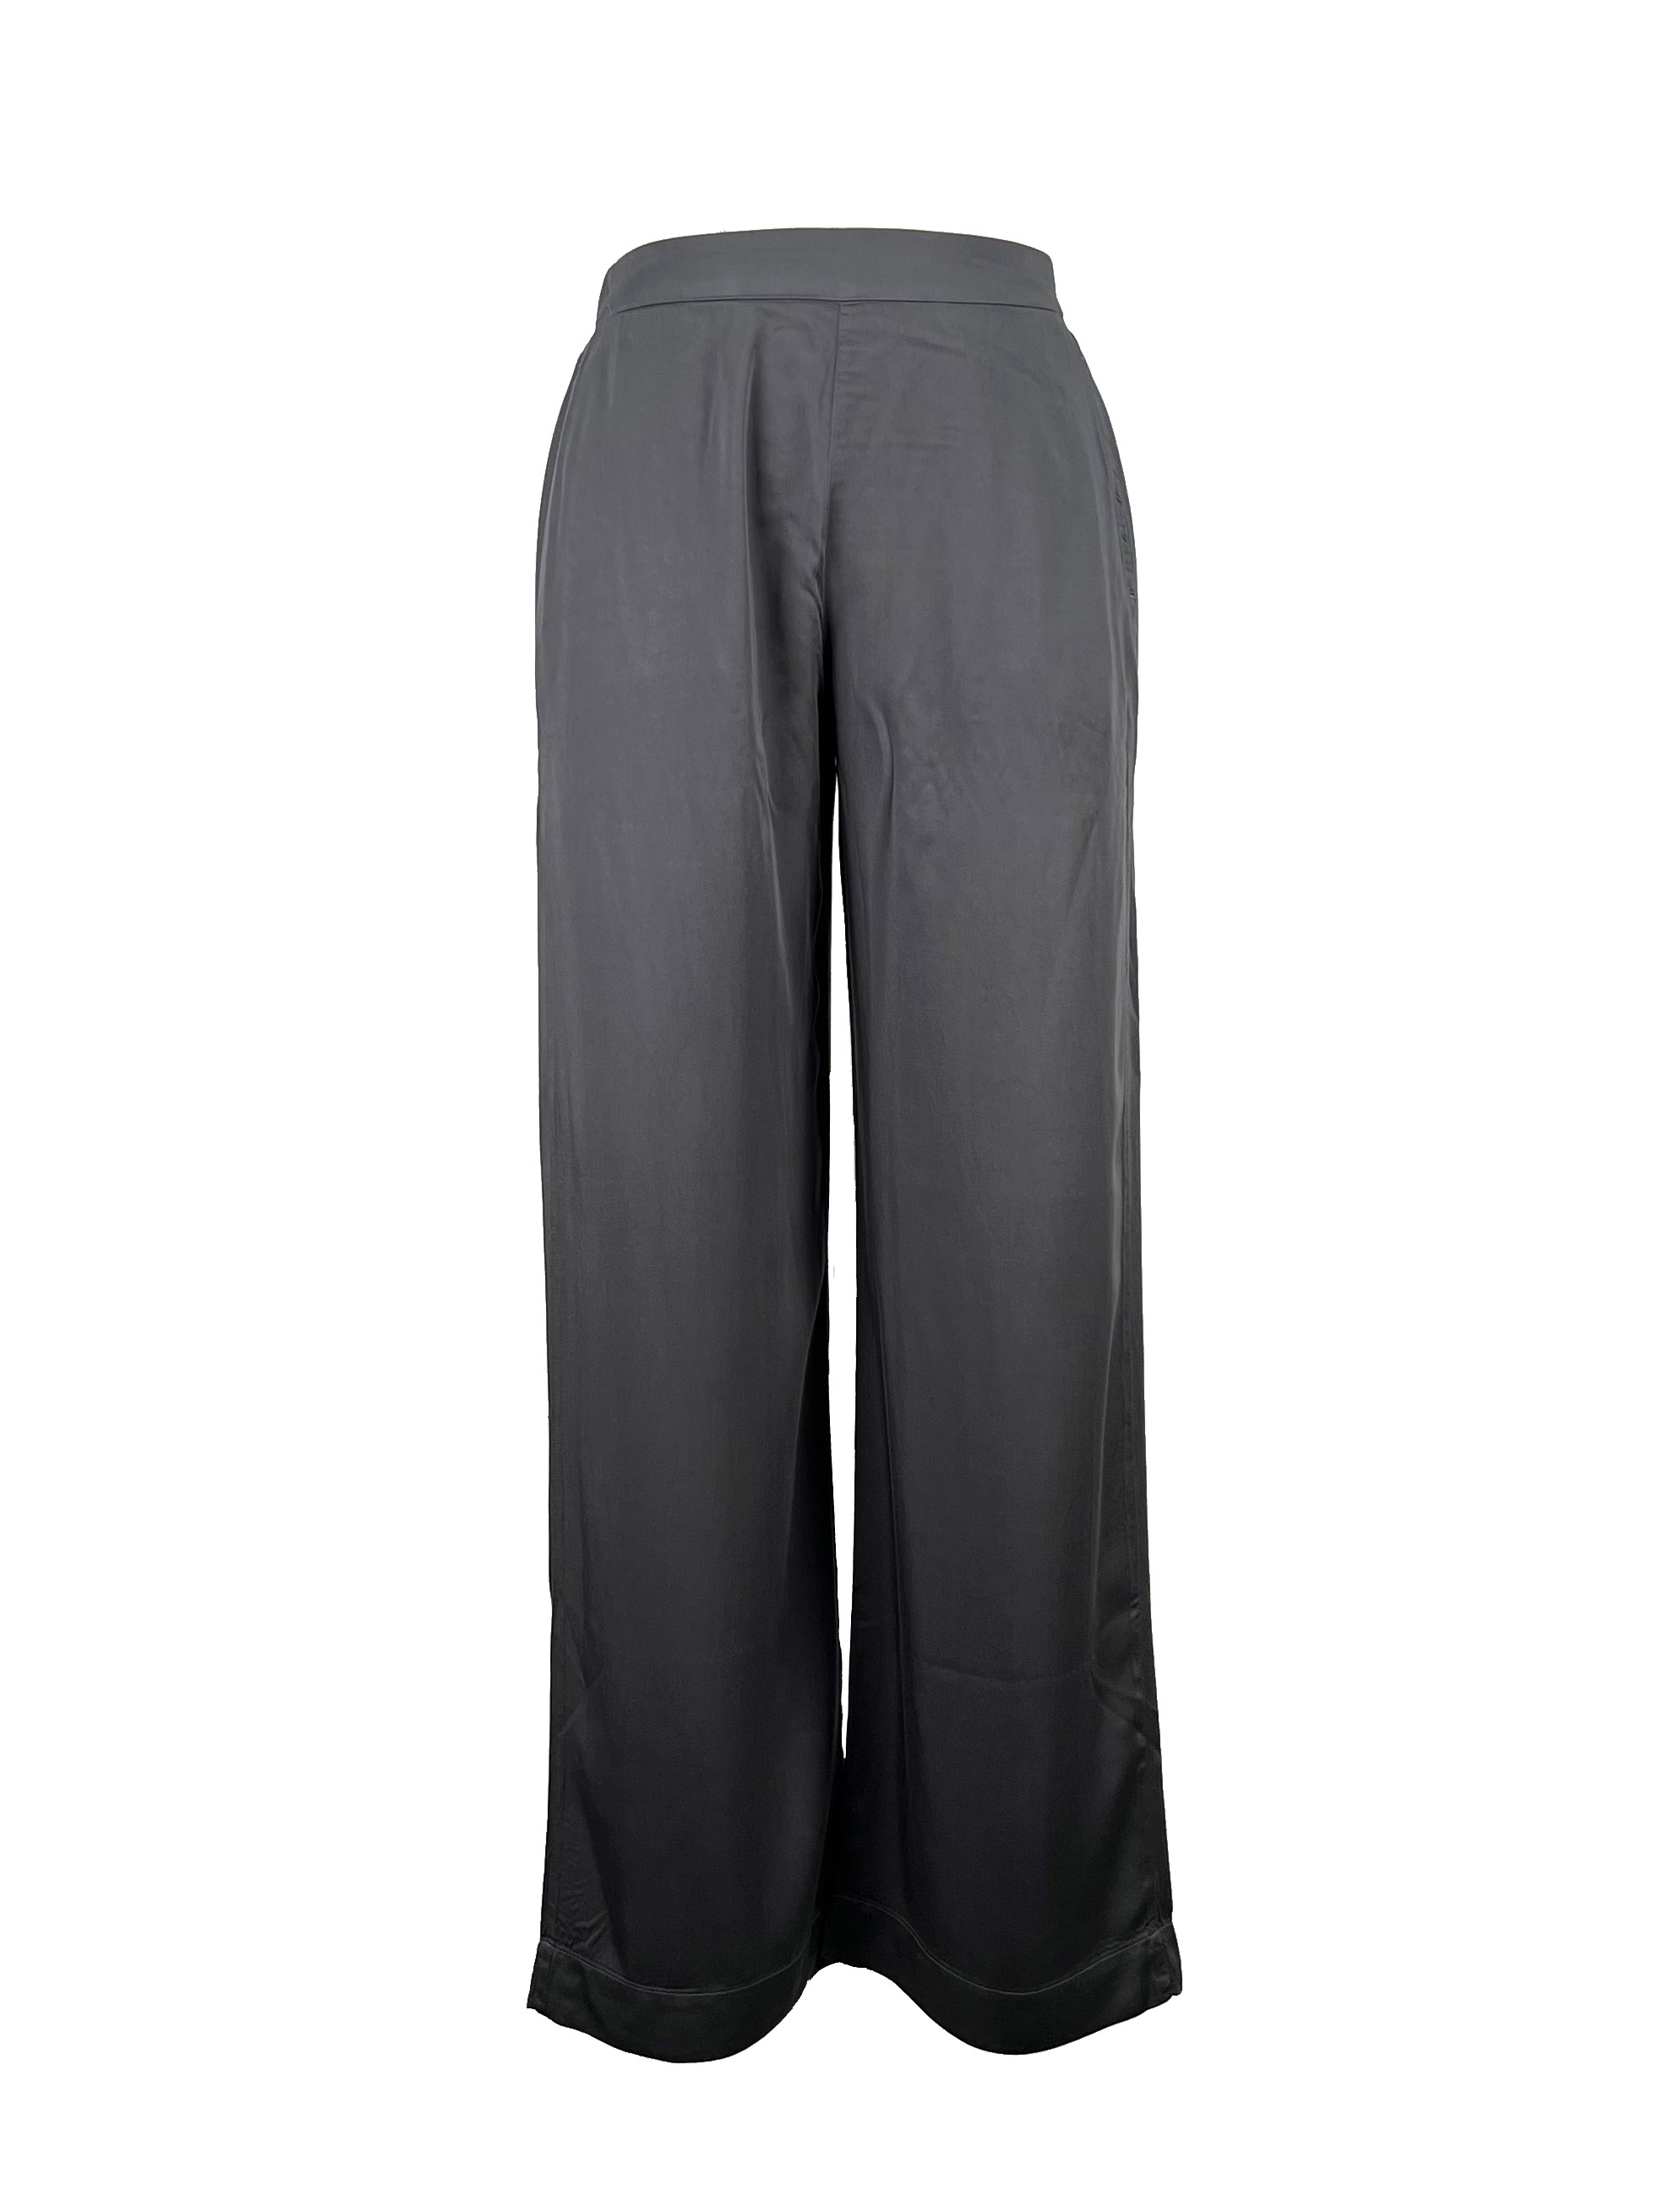 1.trousers (1)